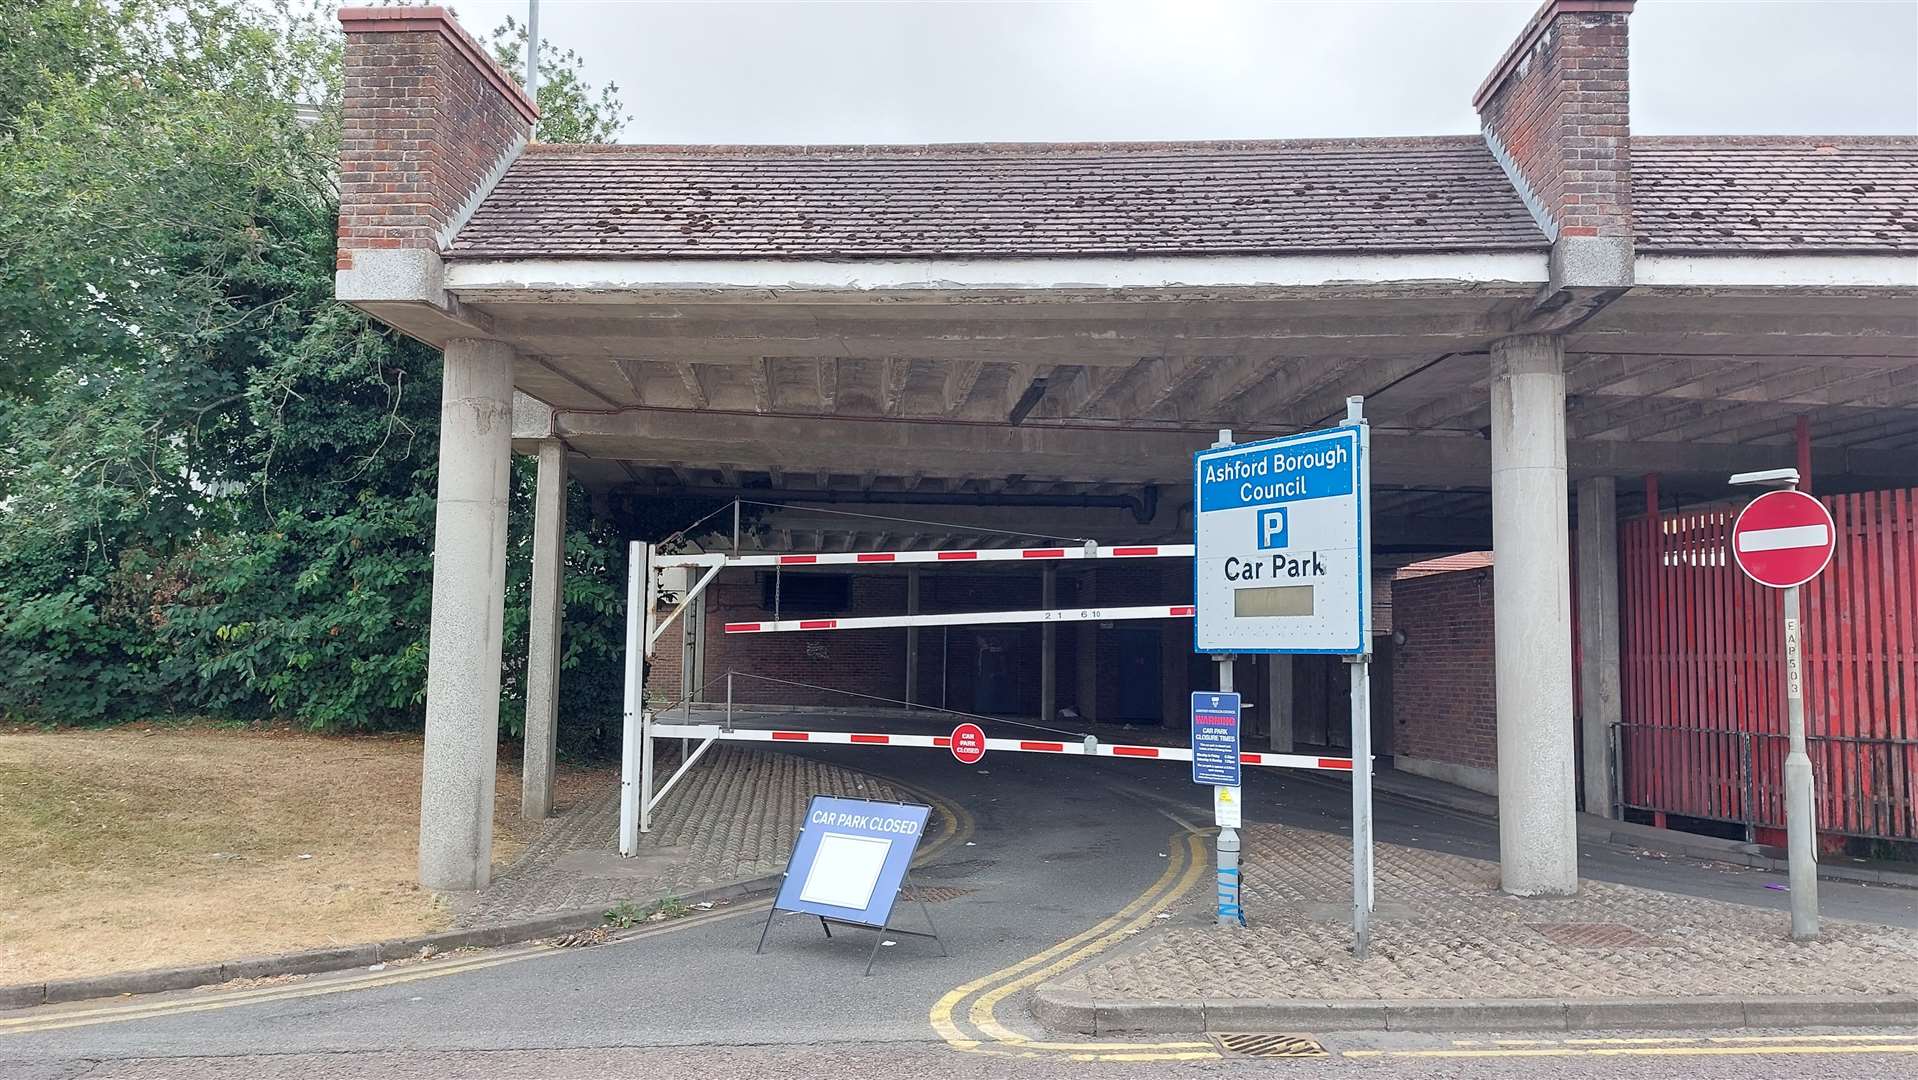 The Edinburgh Road facility has been closed since July